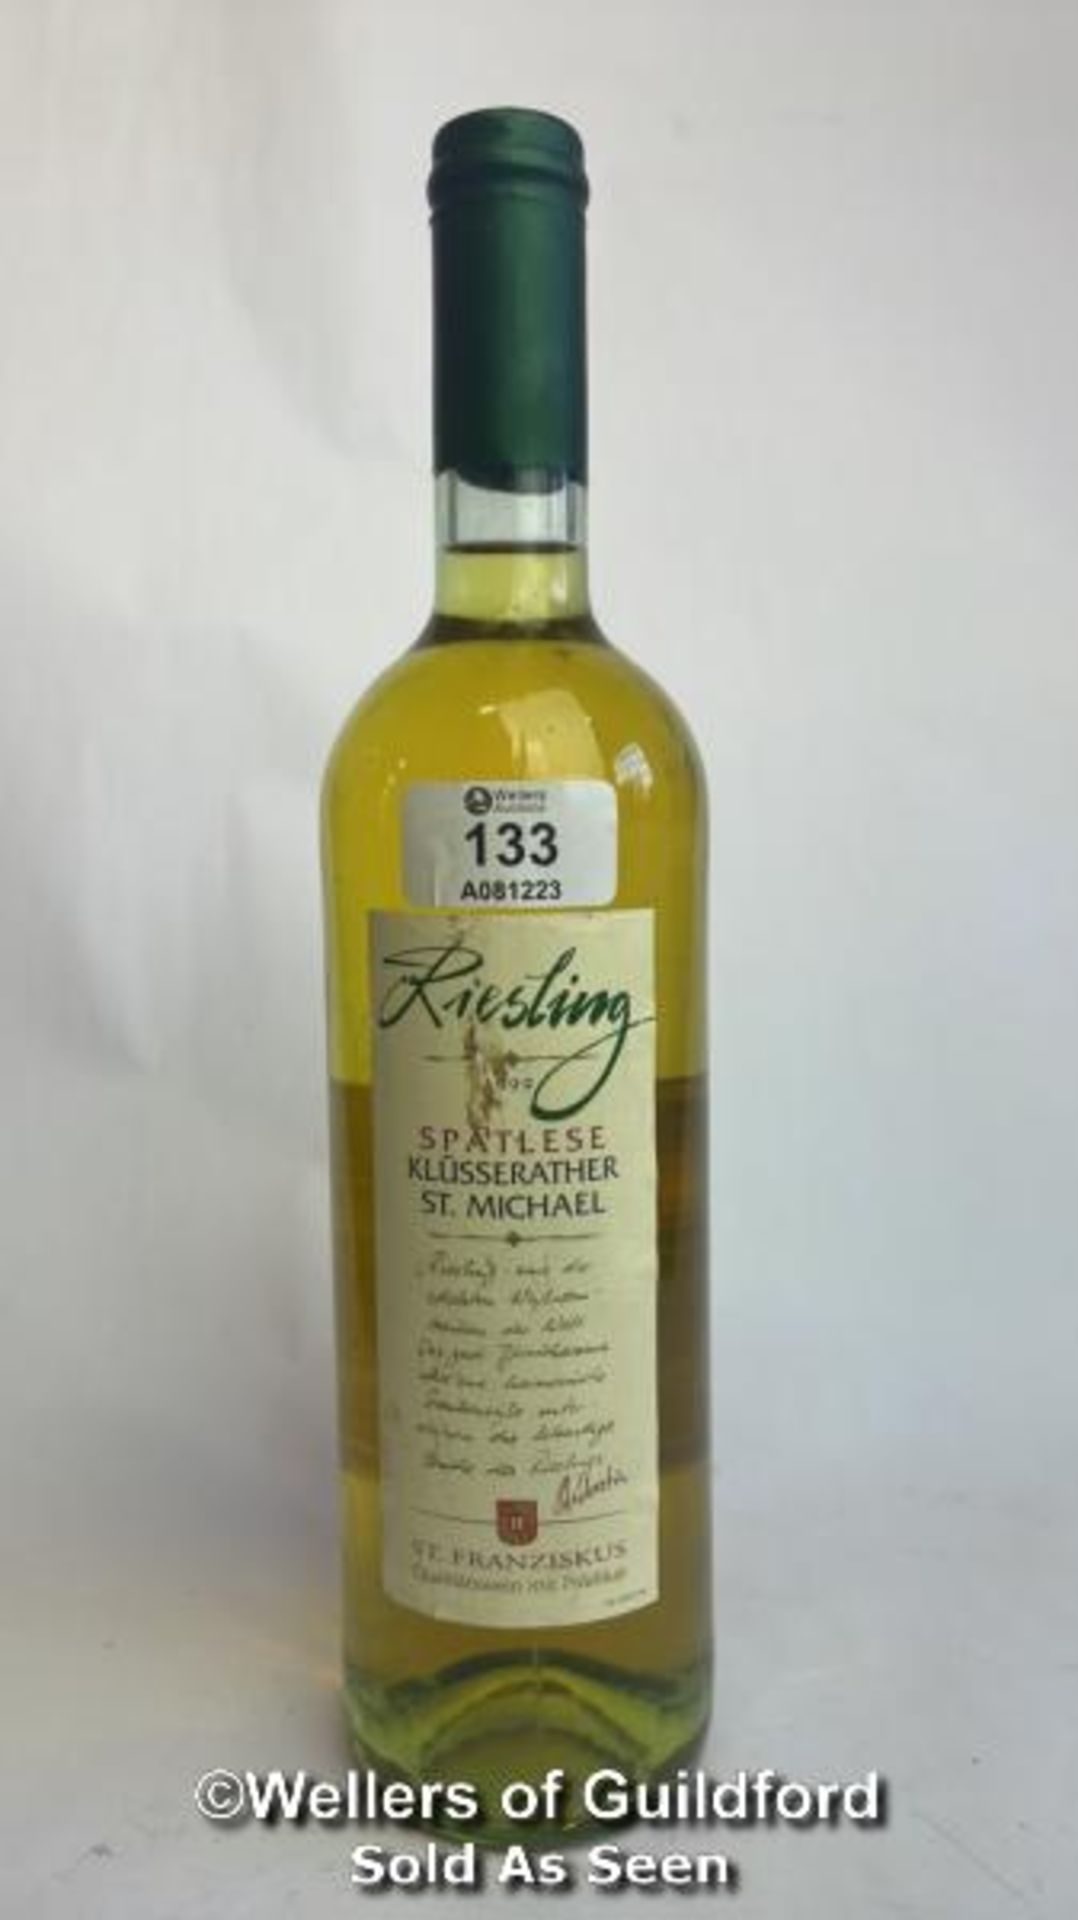 1999 Riesling Spatlese Klusserather St. Michael, 75cl, 8% vol / Please see images for fill level and